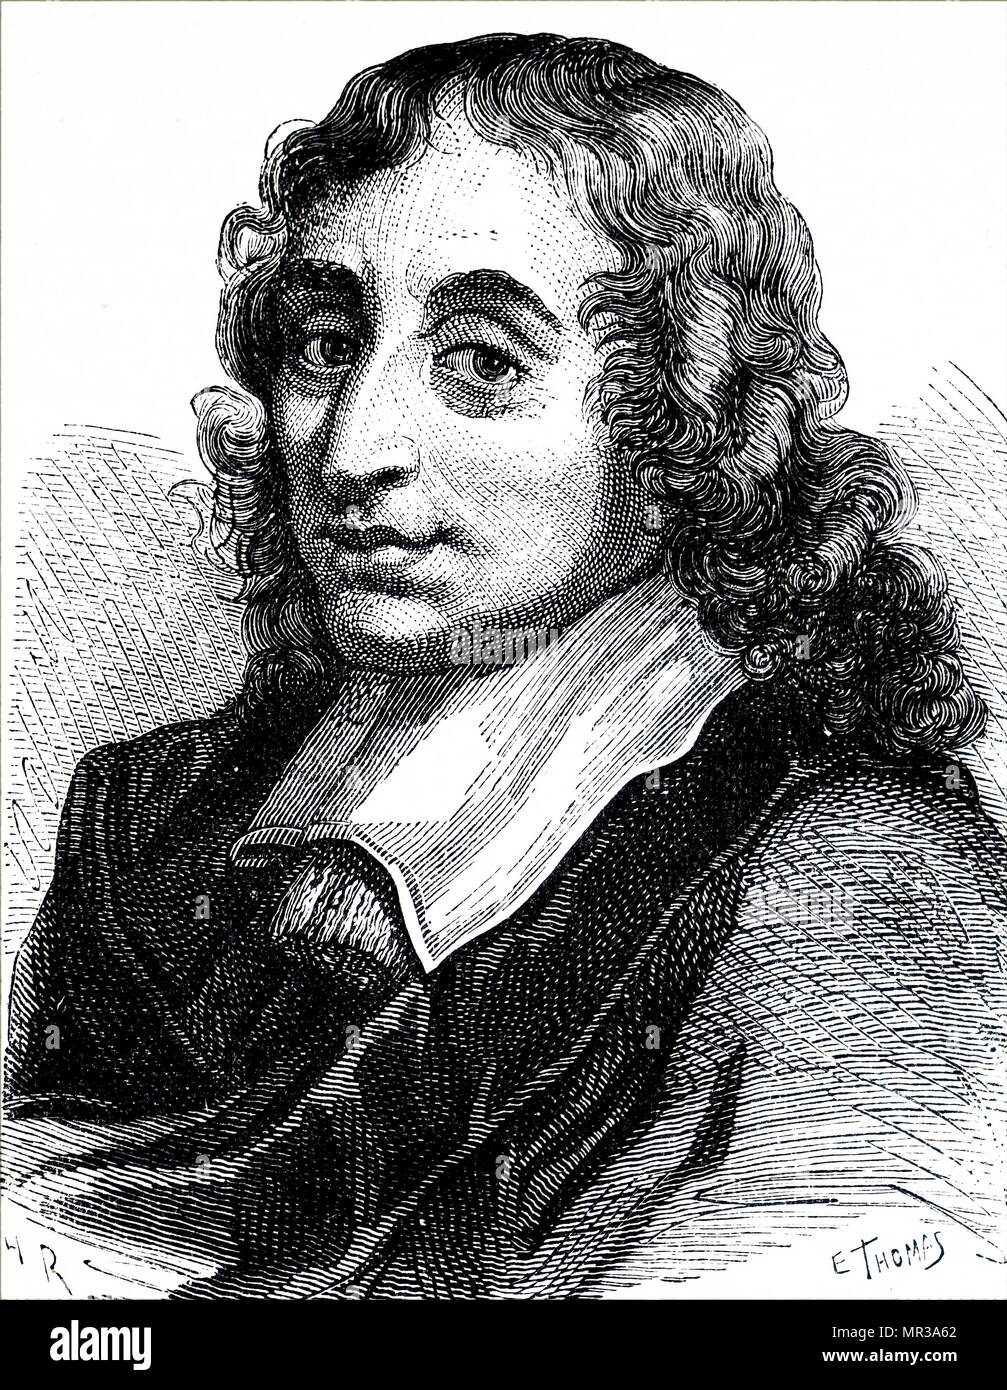 Portrait of Blaise Pascal (1623-1662) a French mathematician, physicist, inventor, writer and Catholic theologian. Dated 19th century Stock Photo